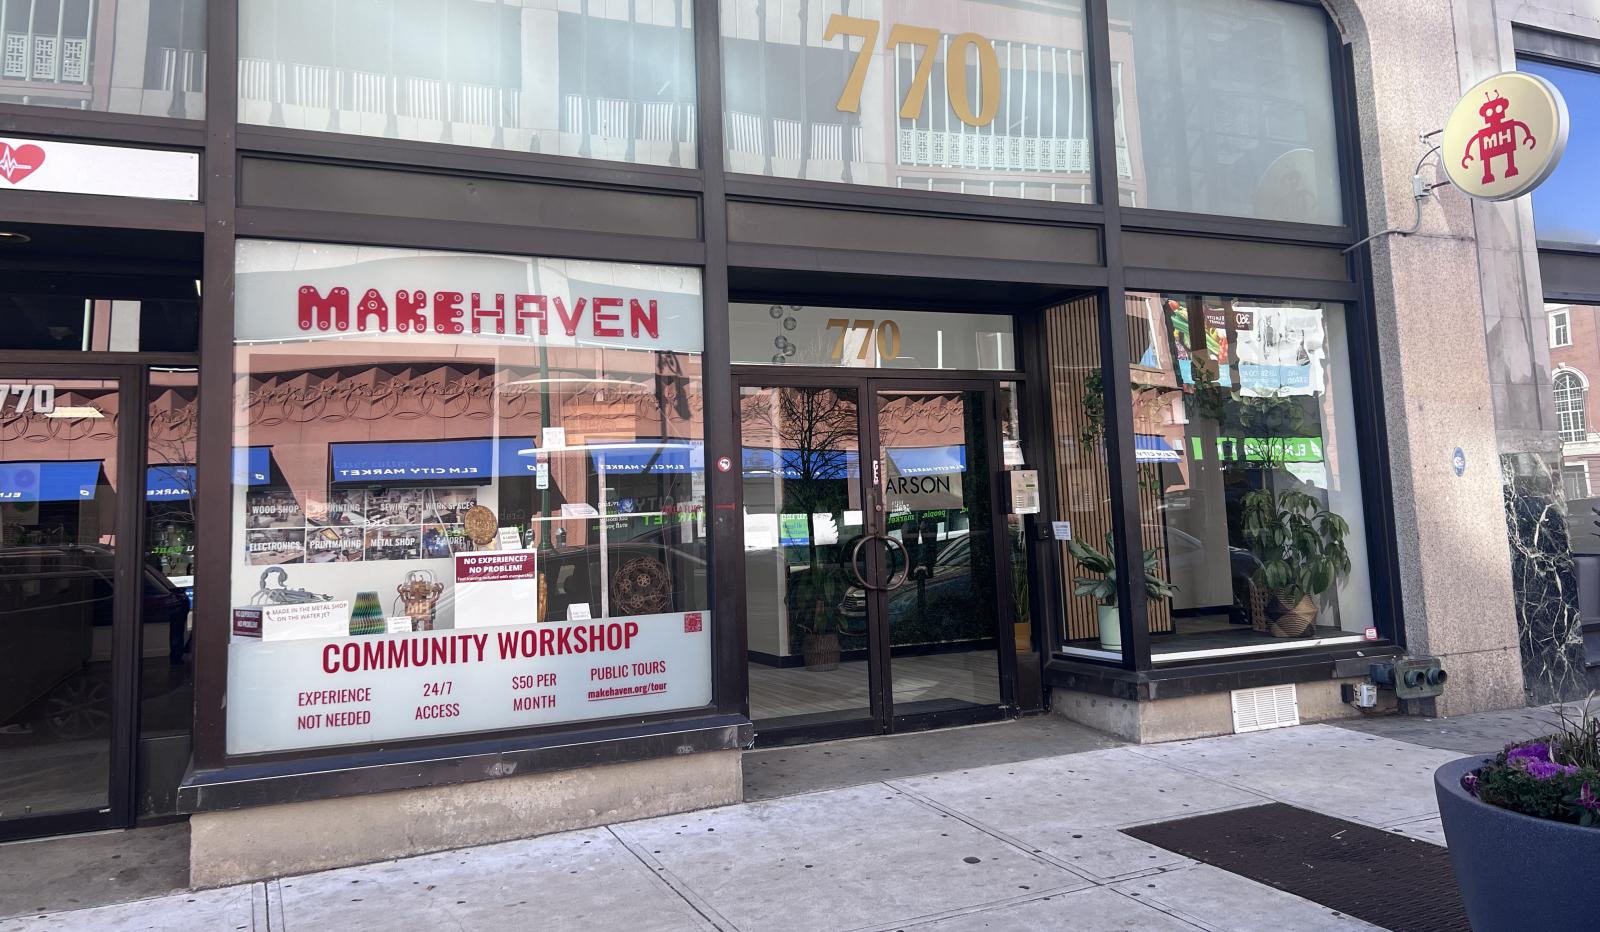 The main entrance of MakeHaven is seen at 770 Chapel Street. A large gold 770 is above the doorway. To the right of the door is a storefront window filled with projects made at MakeHaven including a cutting board, a ceramic mug, a metal scorpion, a gold cast Harry Potter resin piece and more.